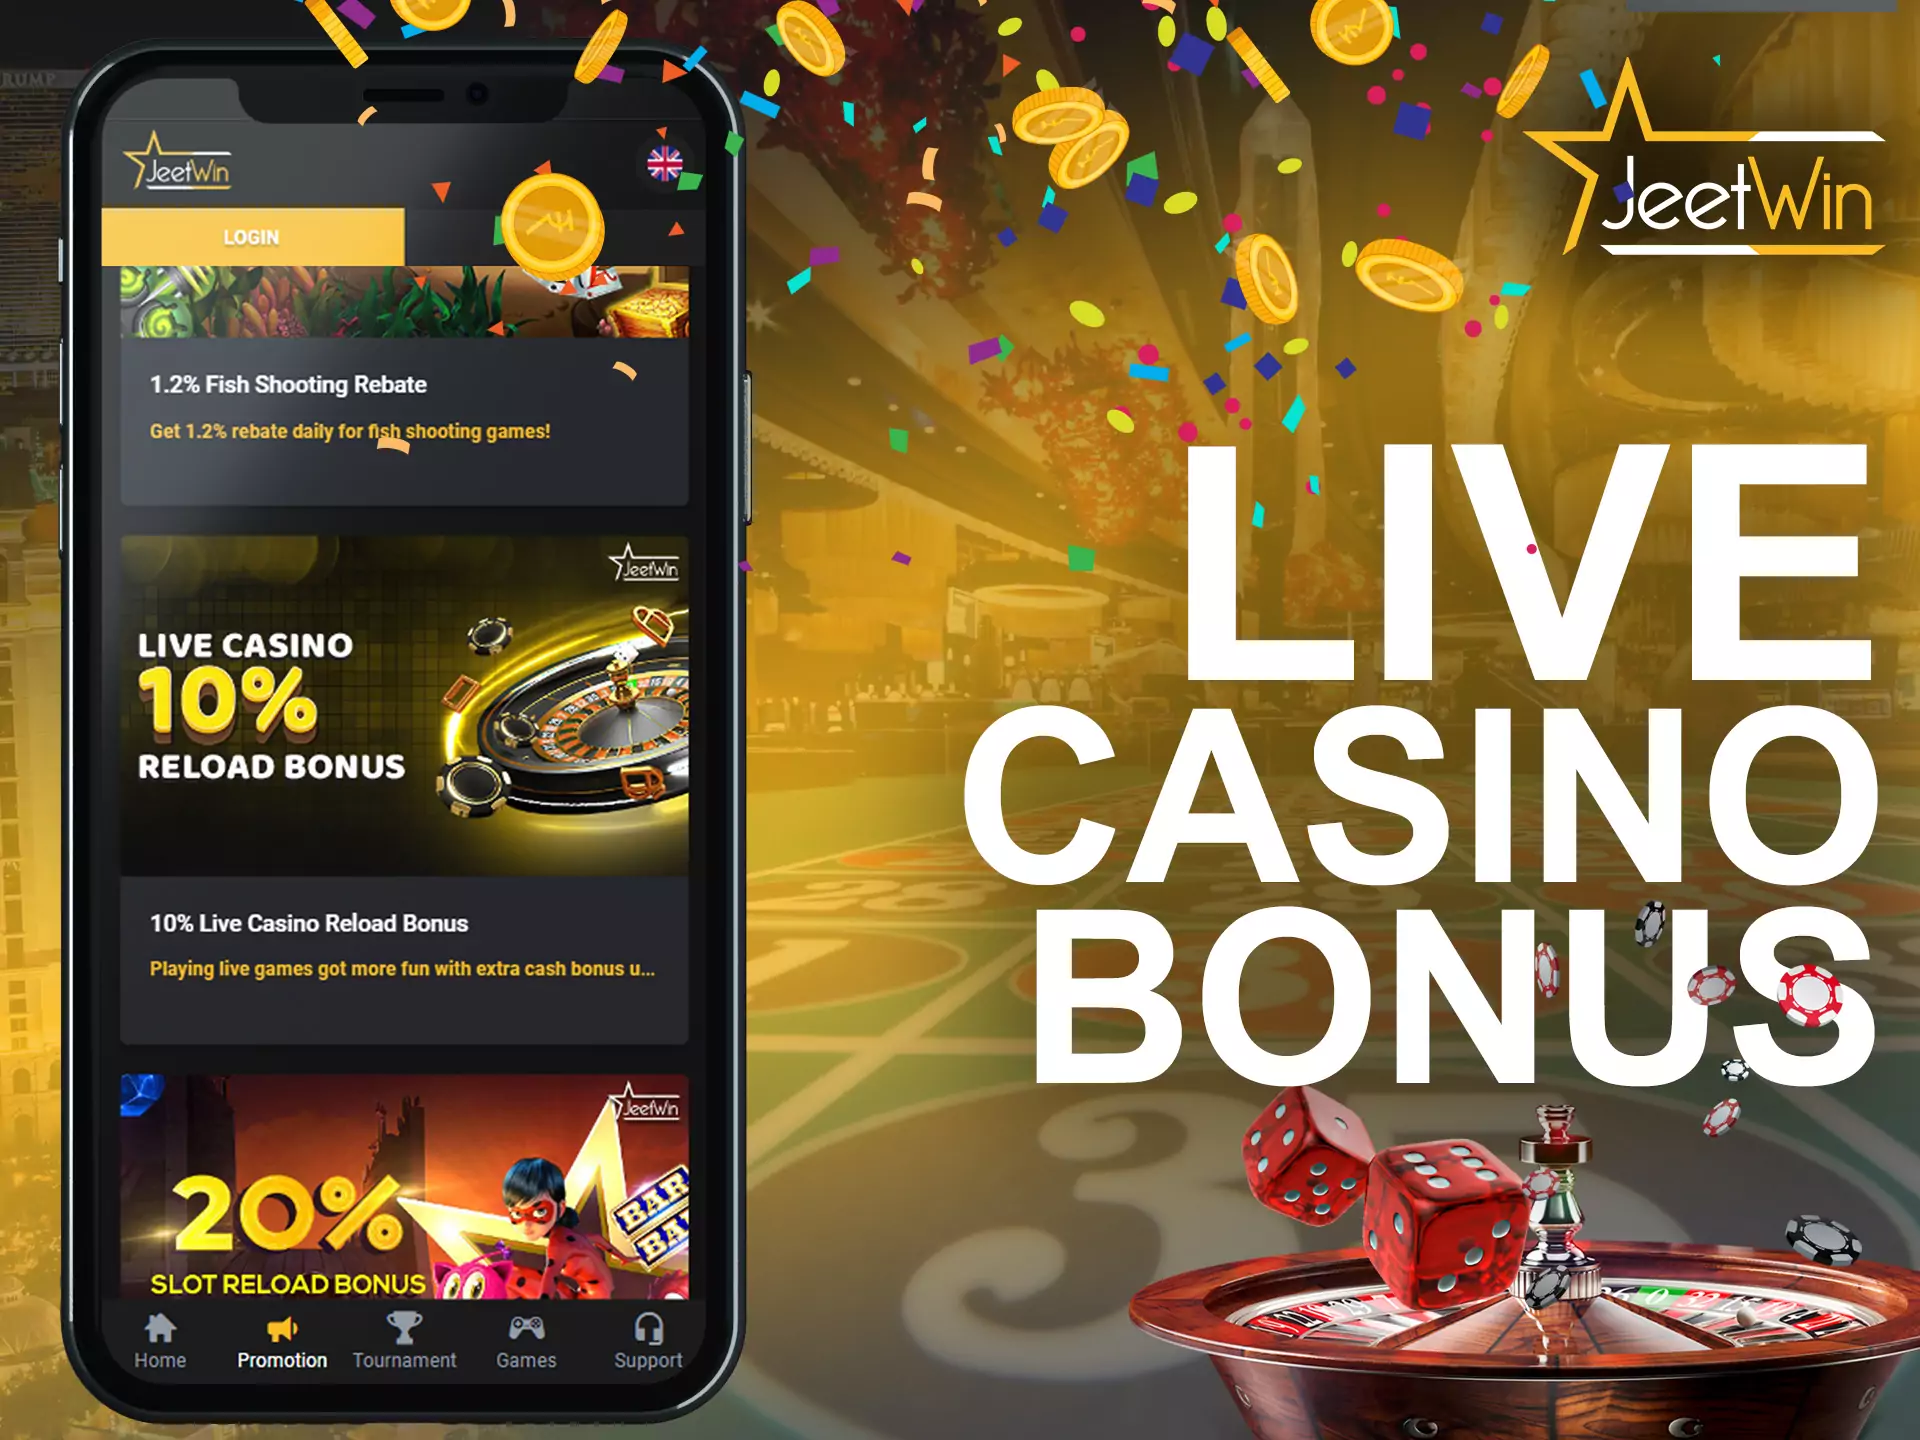 Get a special bonus for the live casino at JeetWin.